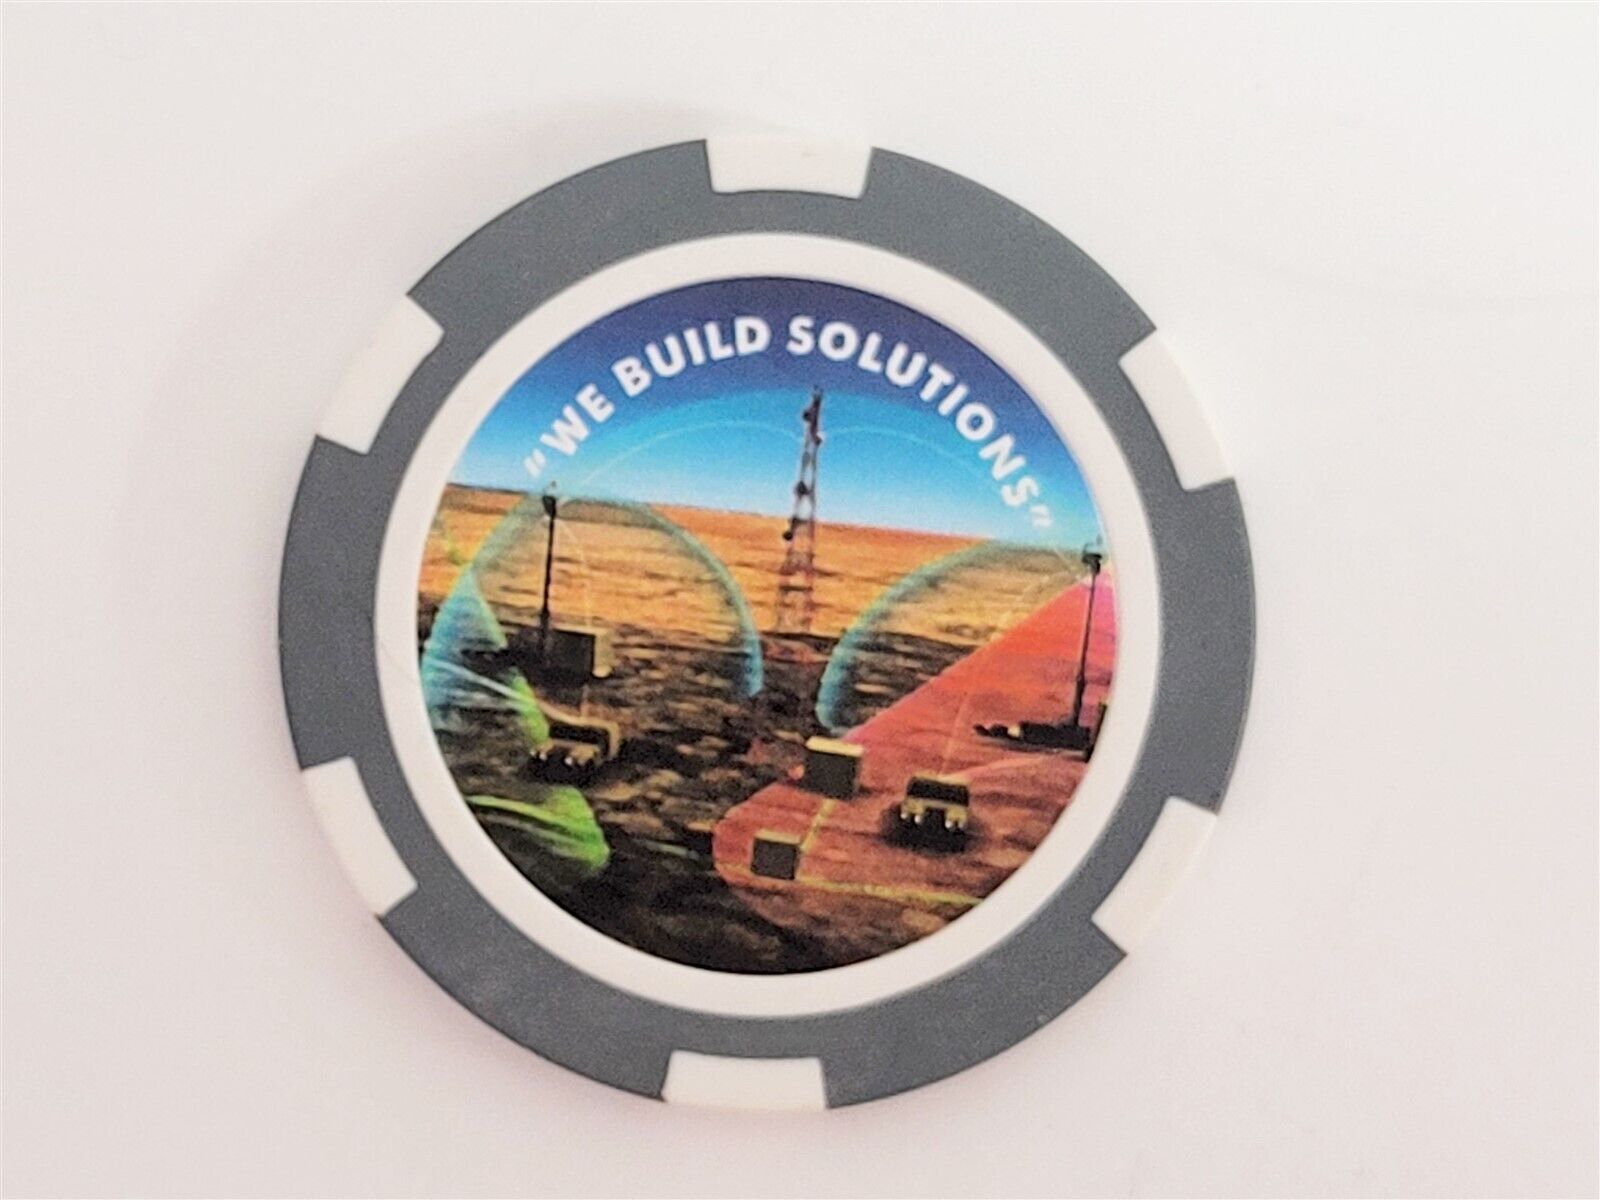 Advanced Technology Systems Company ATSC / We Build Solutions Challenge Coin 2